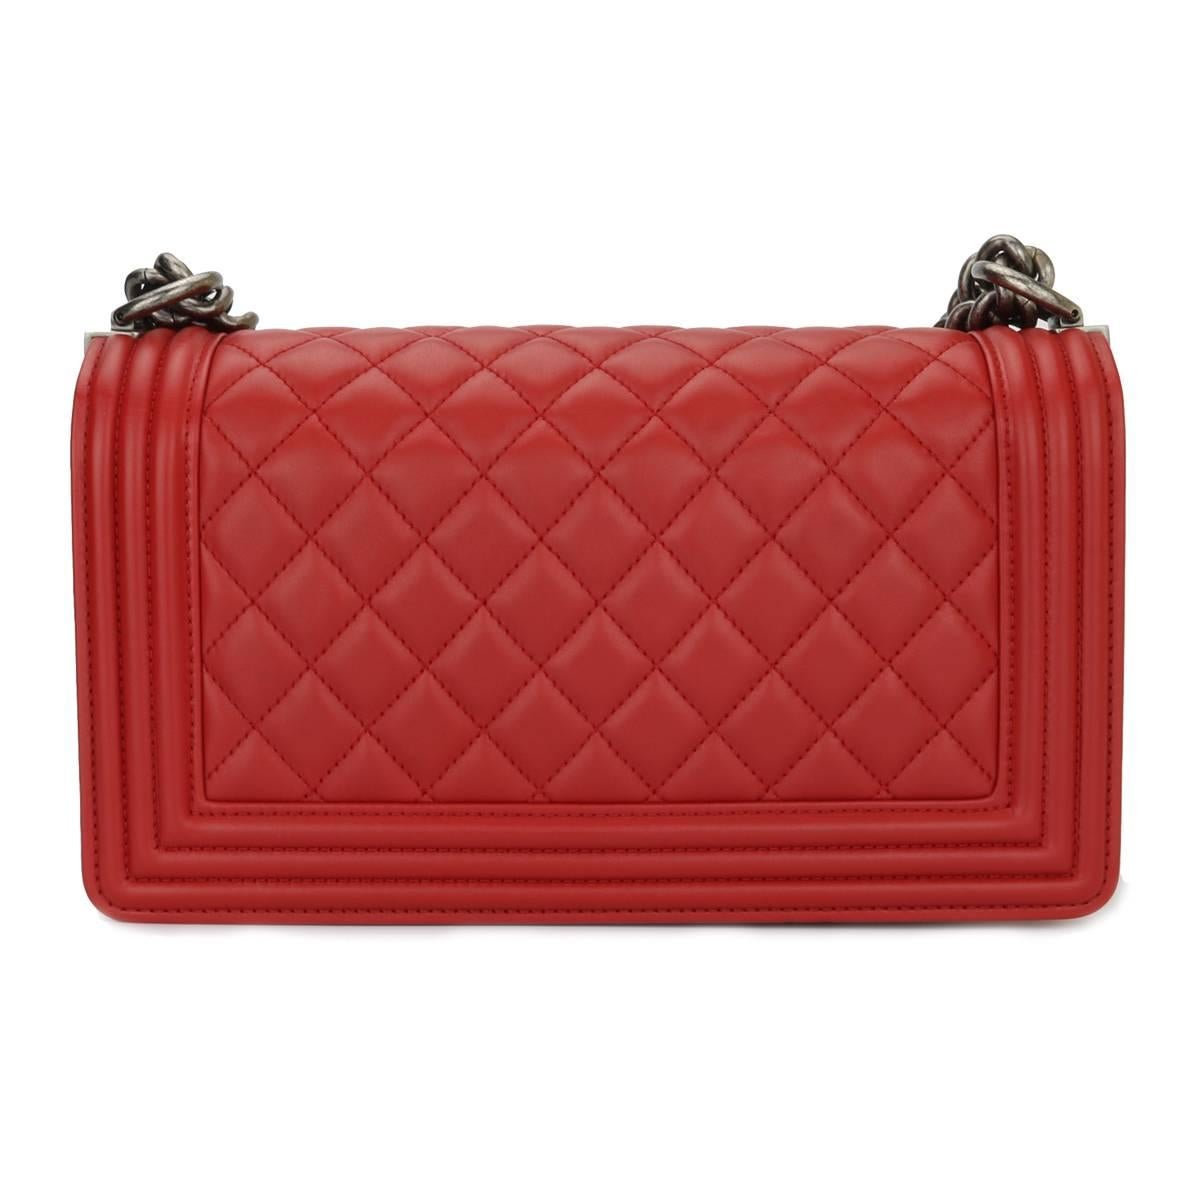 Authentic Chanel Old Medium Boy True Red Calfskin with Ruthenium Hardware 2015

This stunning bag is still in a mint condition, the bag still holds its original shape and the hardware is still very clean and shiny.

Exterior Condition: Mint